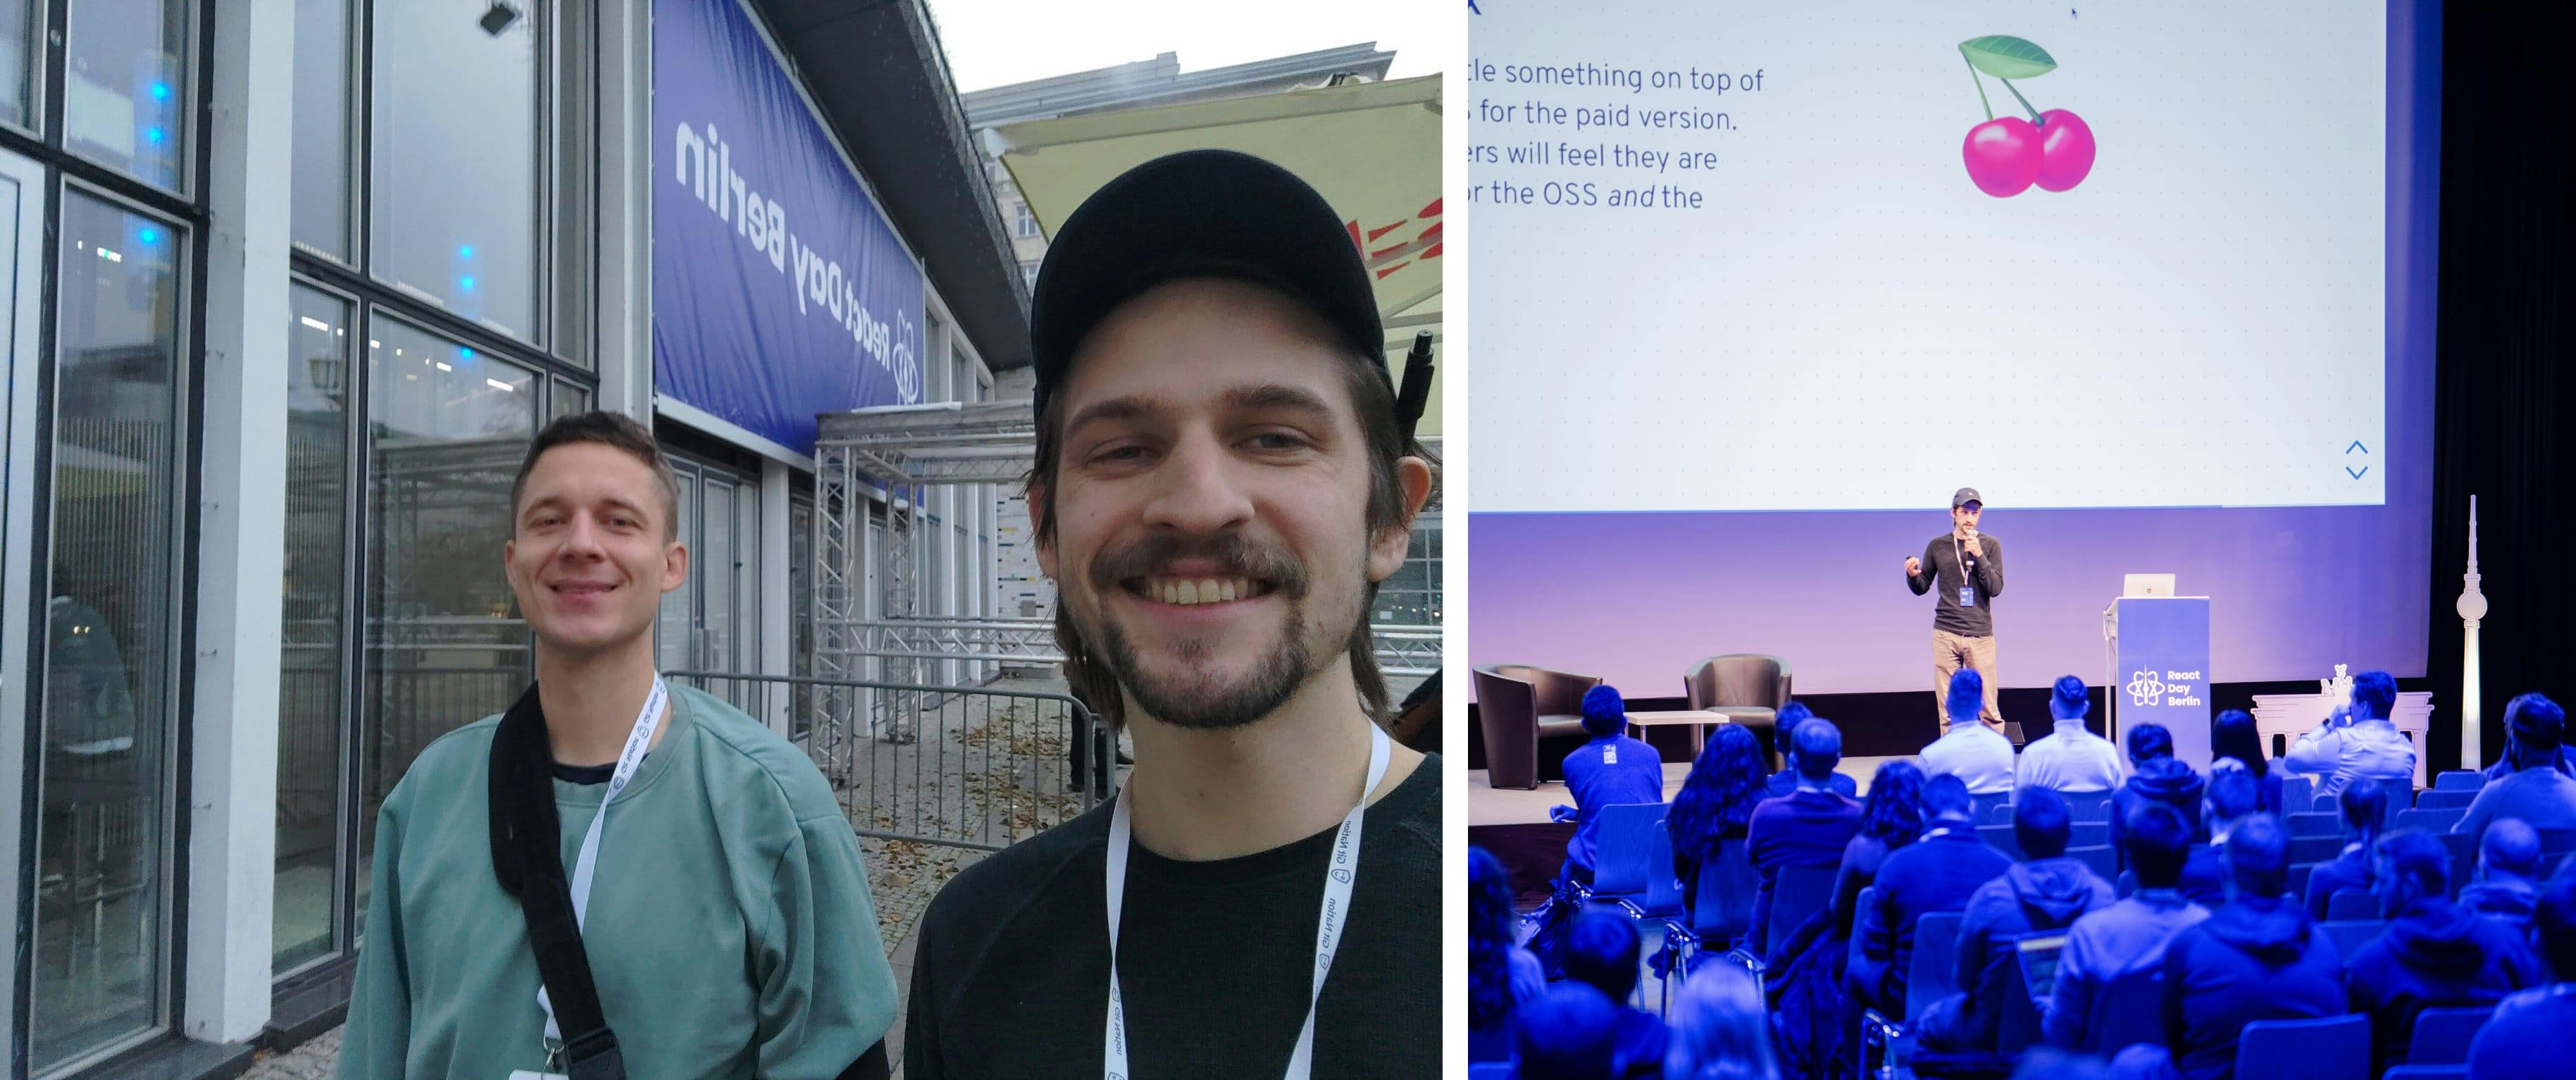 John standing in front of a crowd of people giving a presentation, and a selfie of Moritz and John standing outside the React Day conference building